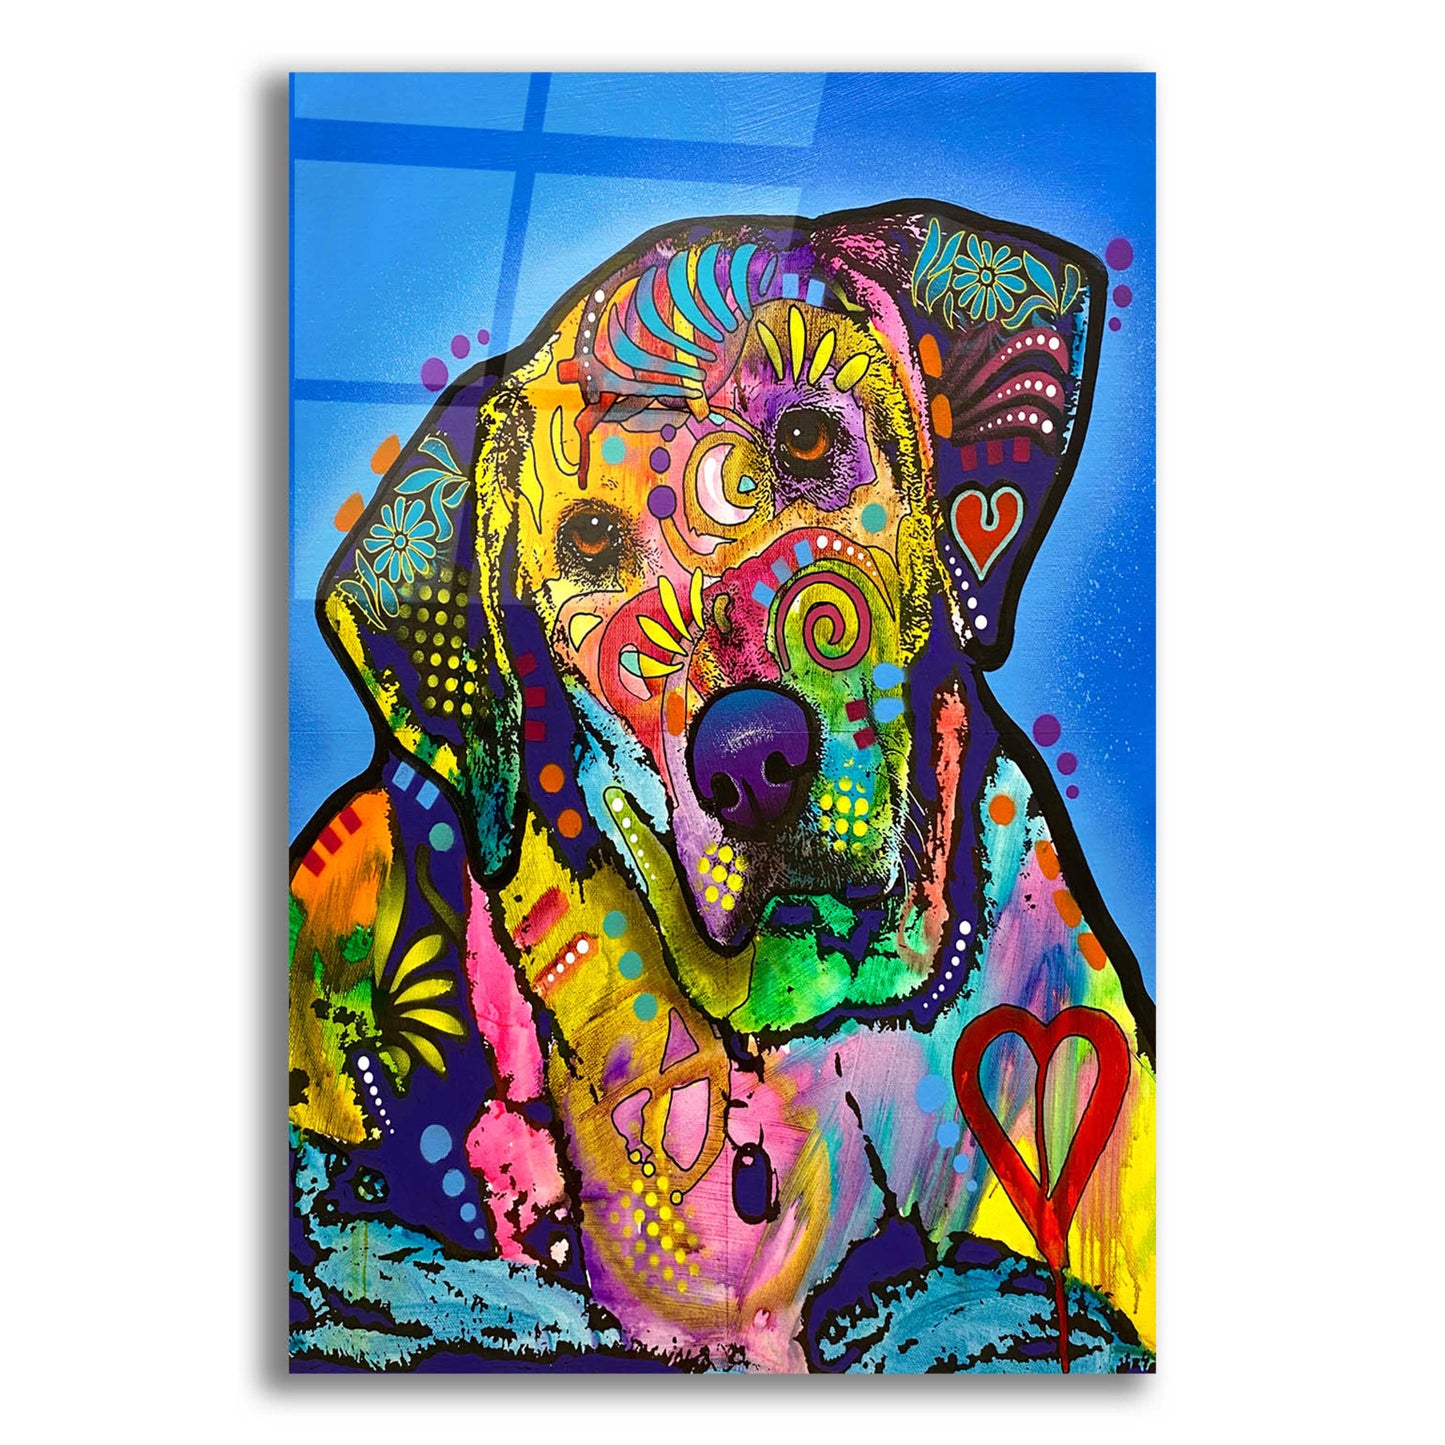 Epic Art 'Got Any Snacks' by Dean Russo, Acrylic Glass Wall Art,,16x24